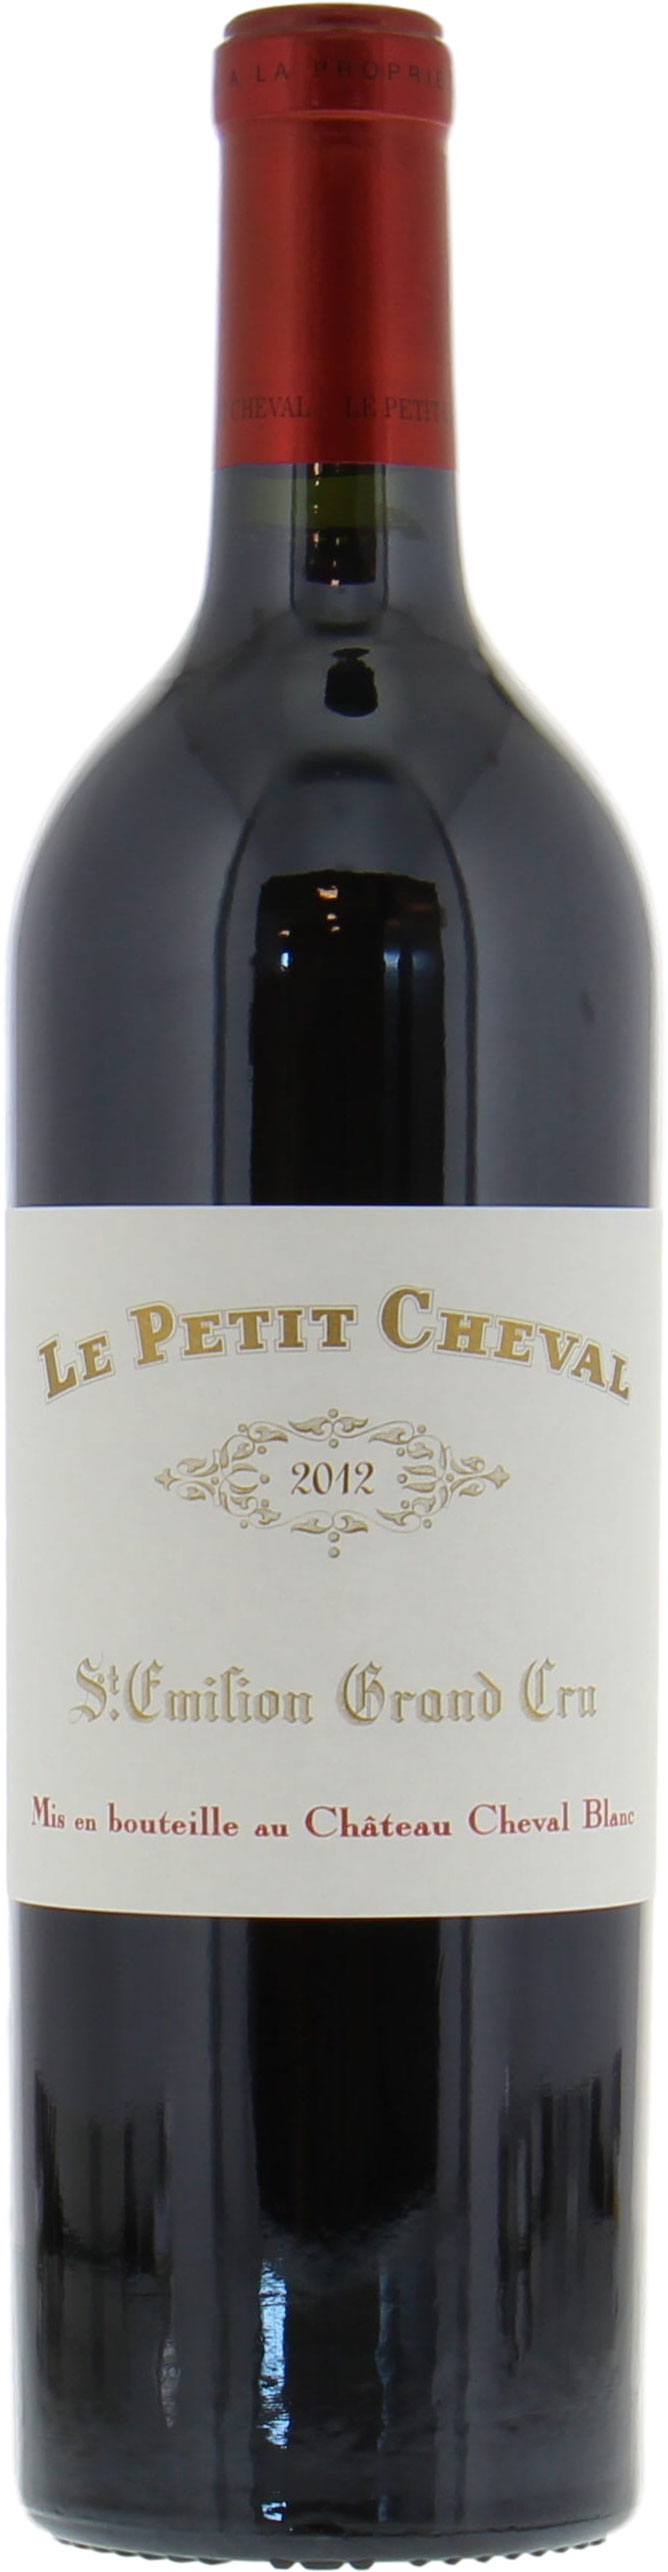 Chateau Cheval Blanc - Le Petit Cheval 2012 From Original Wooden Case